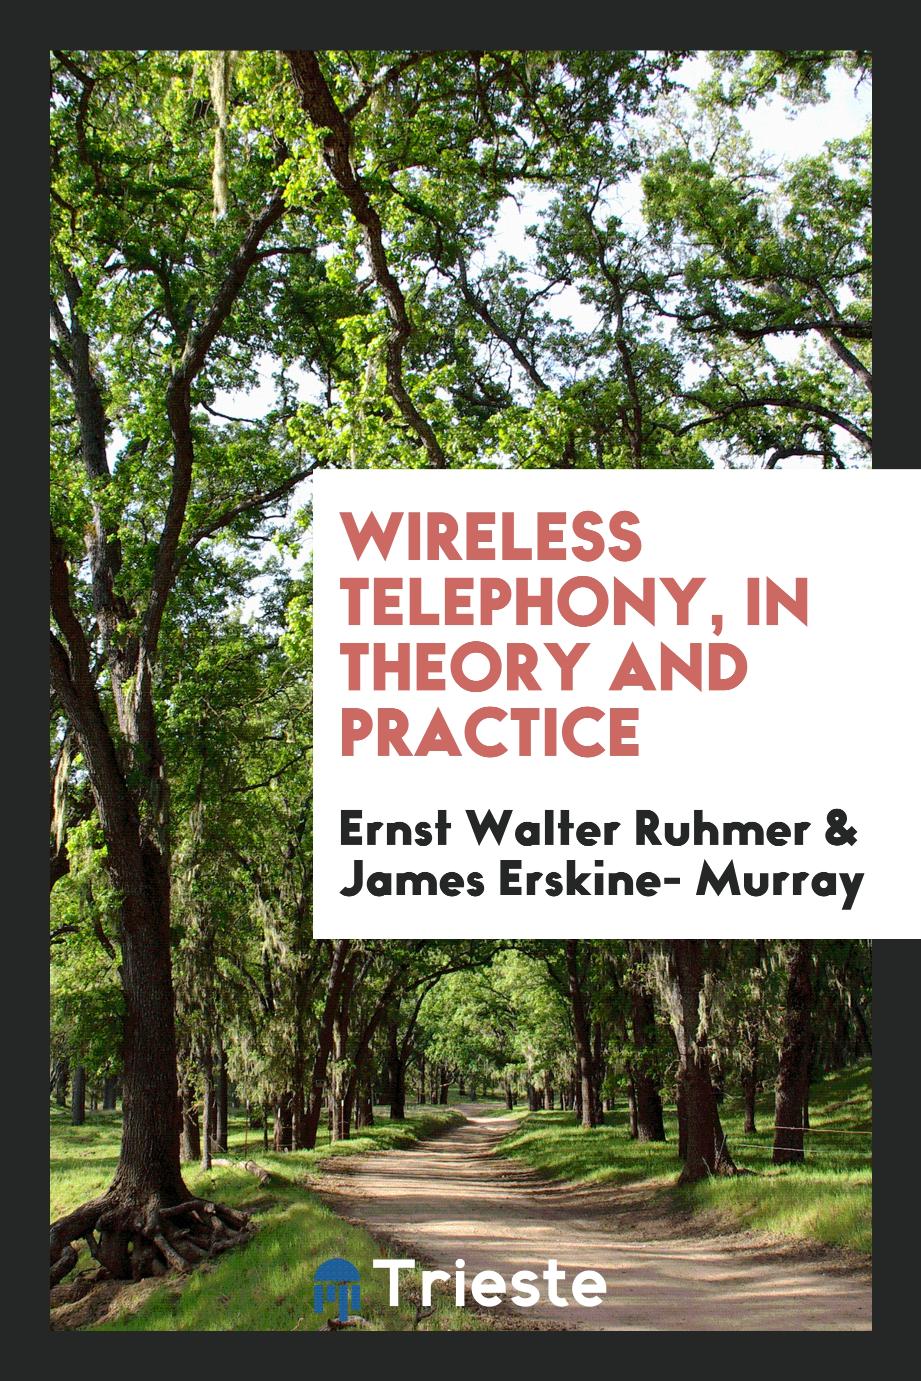 Wireless telephony, in theory and practice